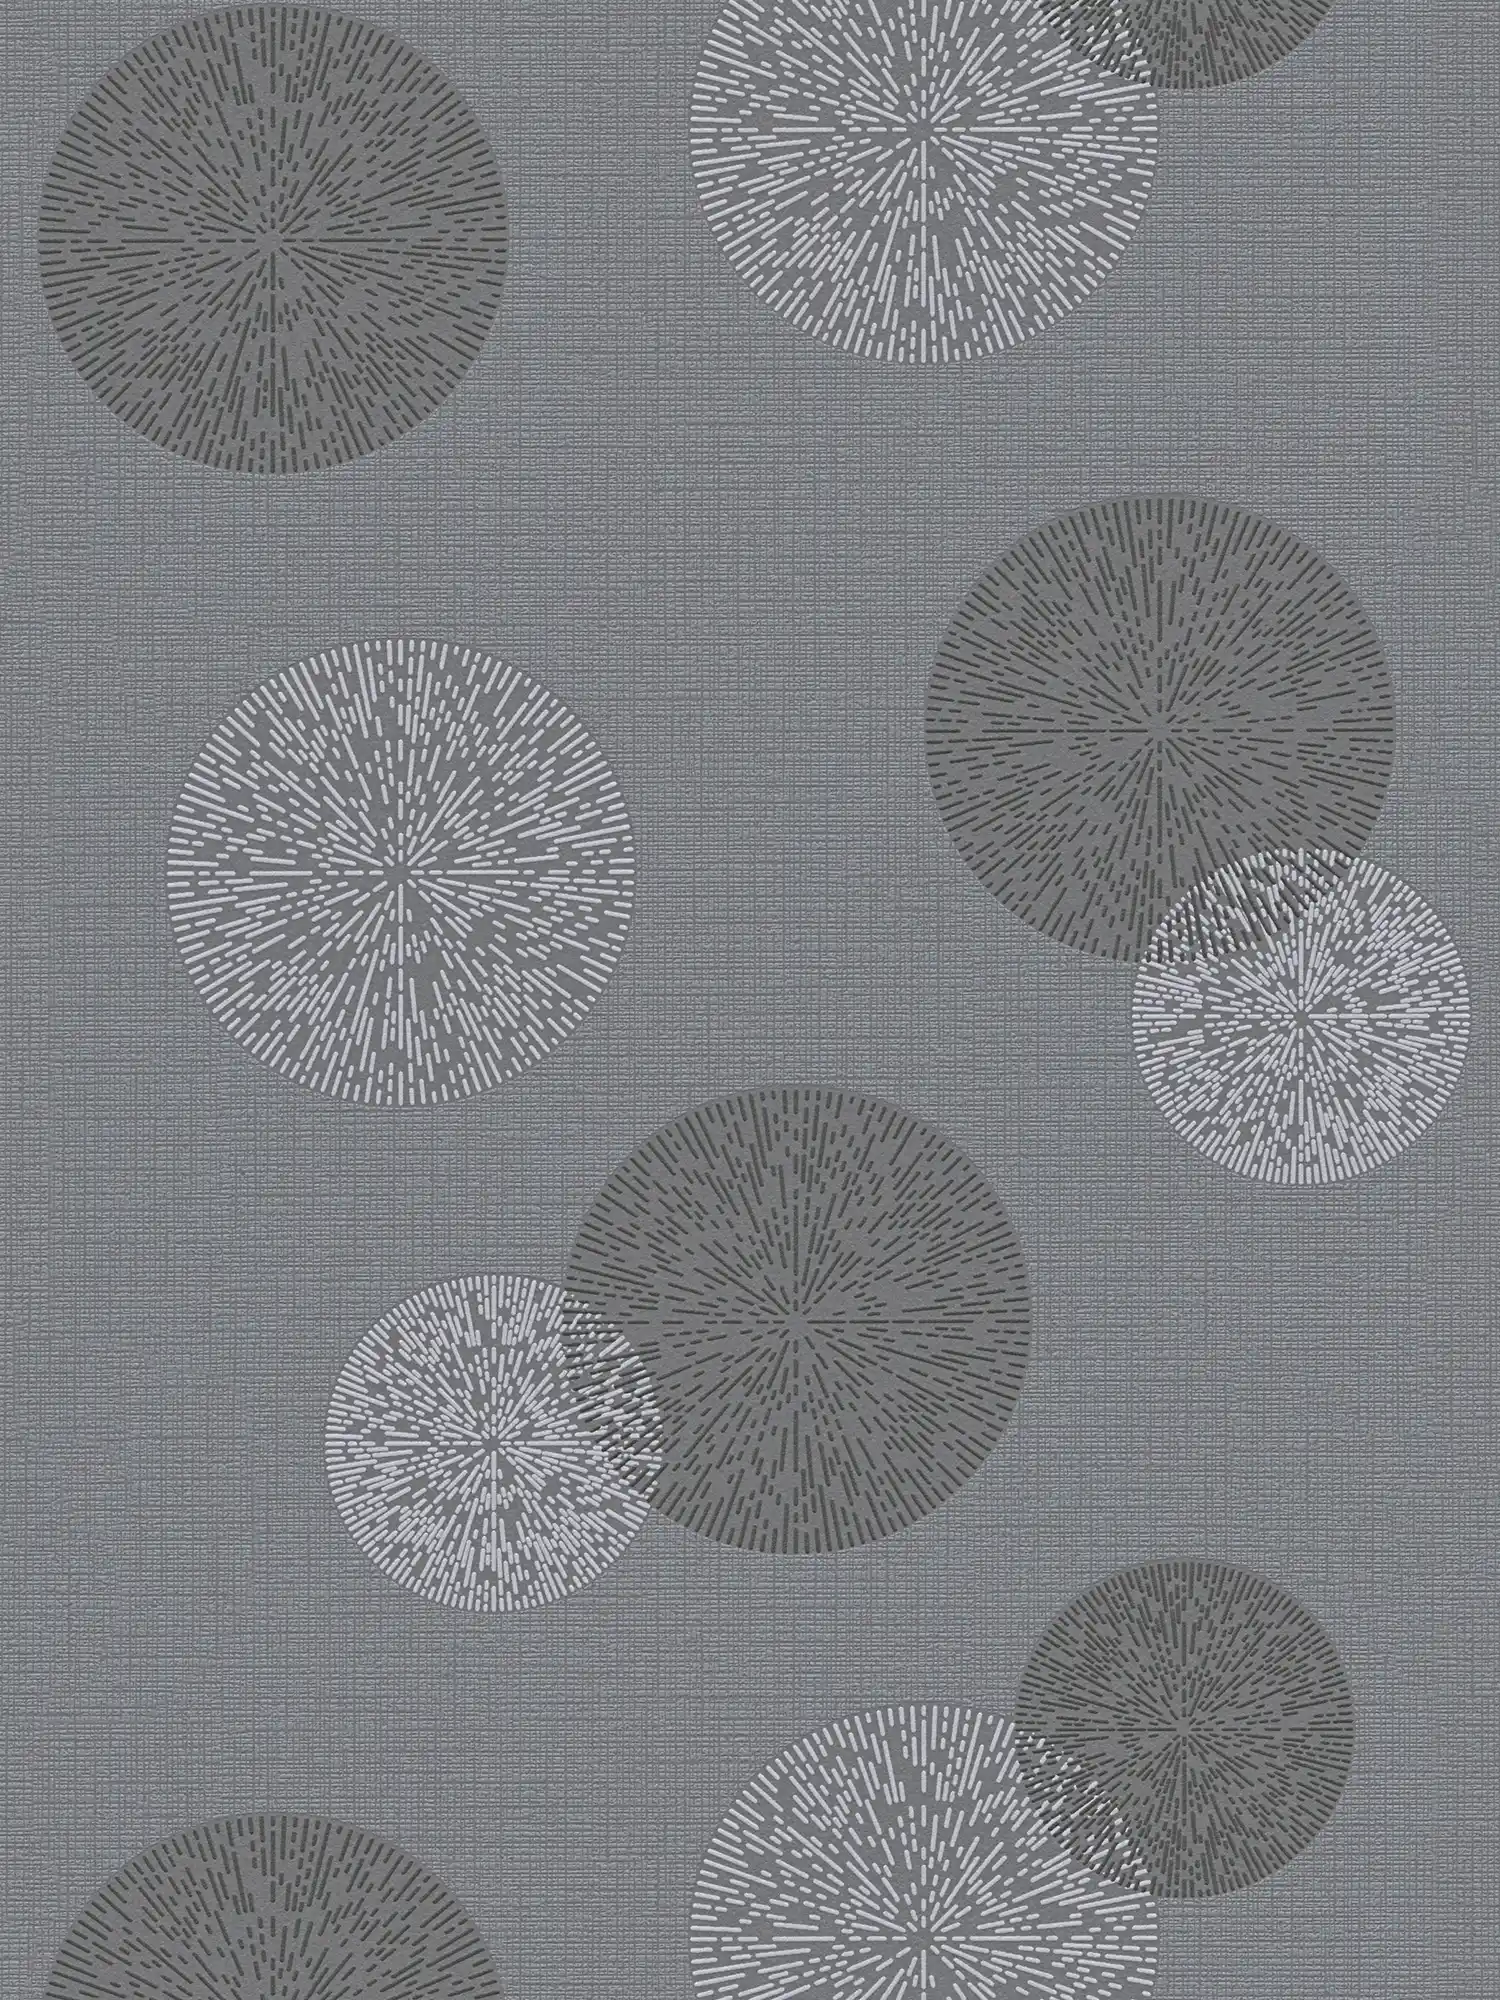 Living room wallpaper with modern circle pattern - grey
